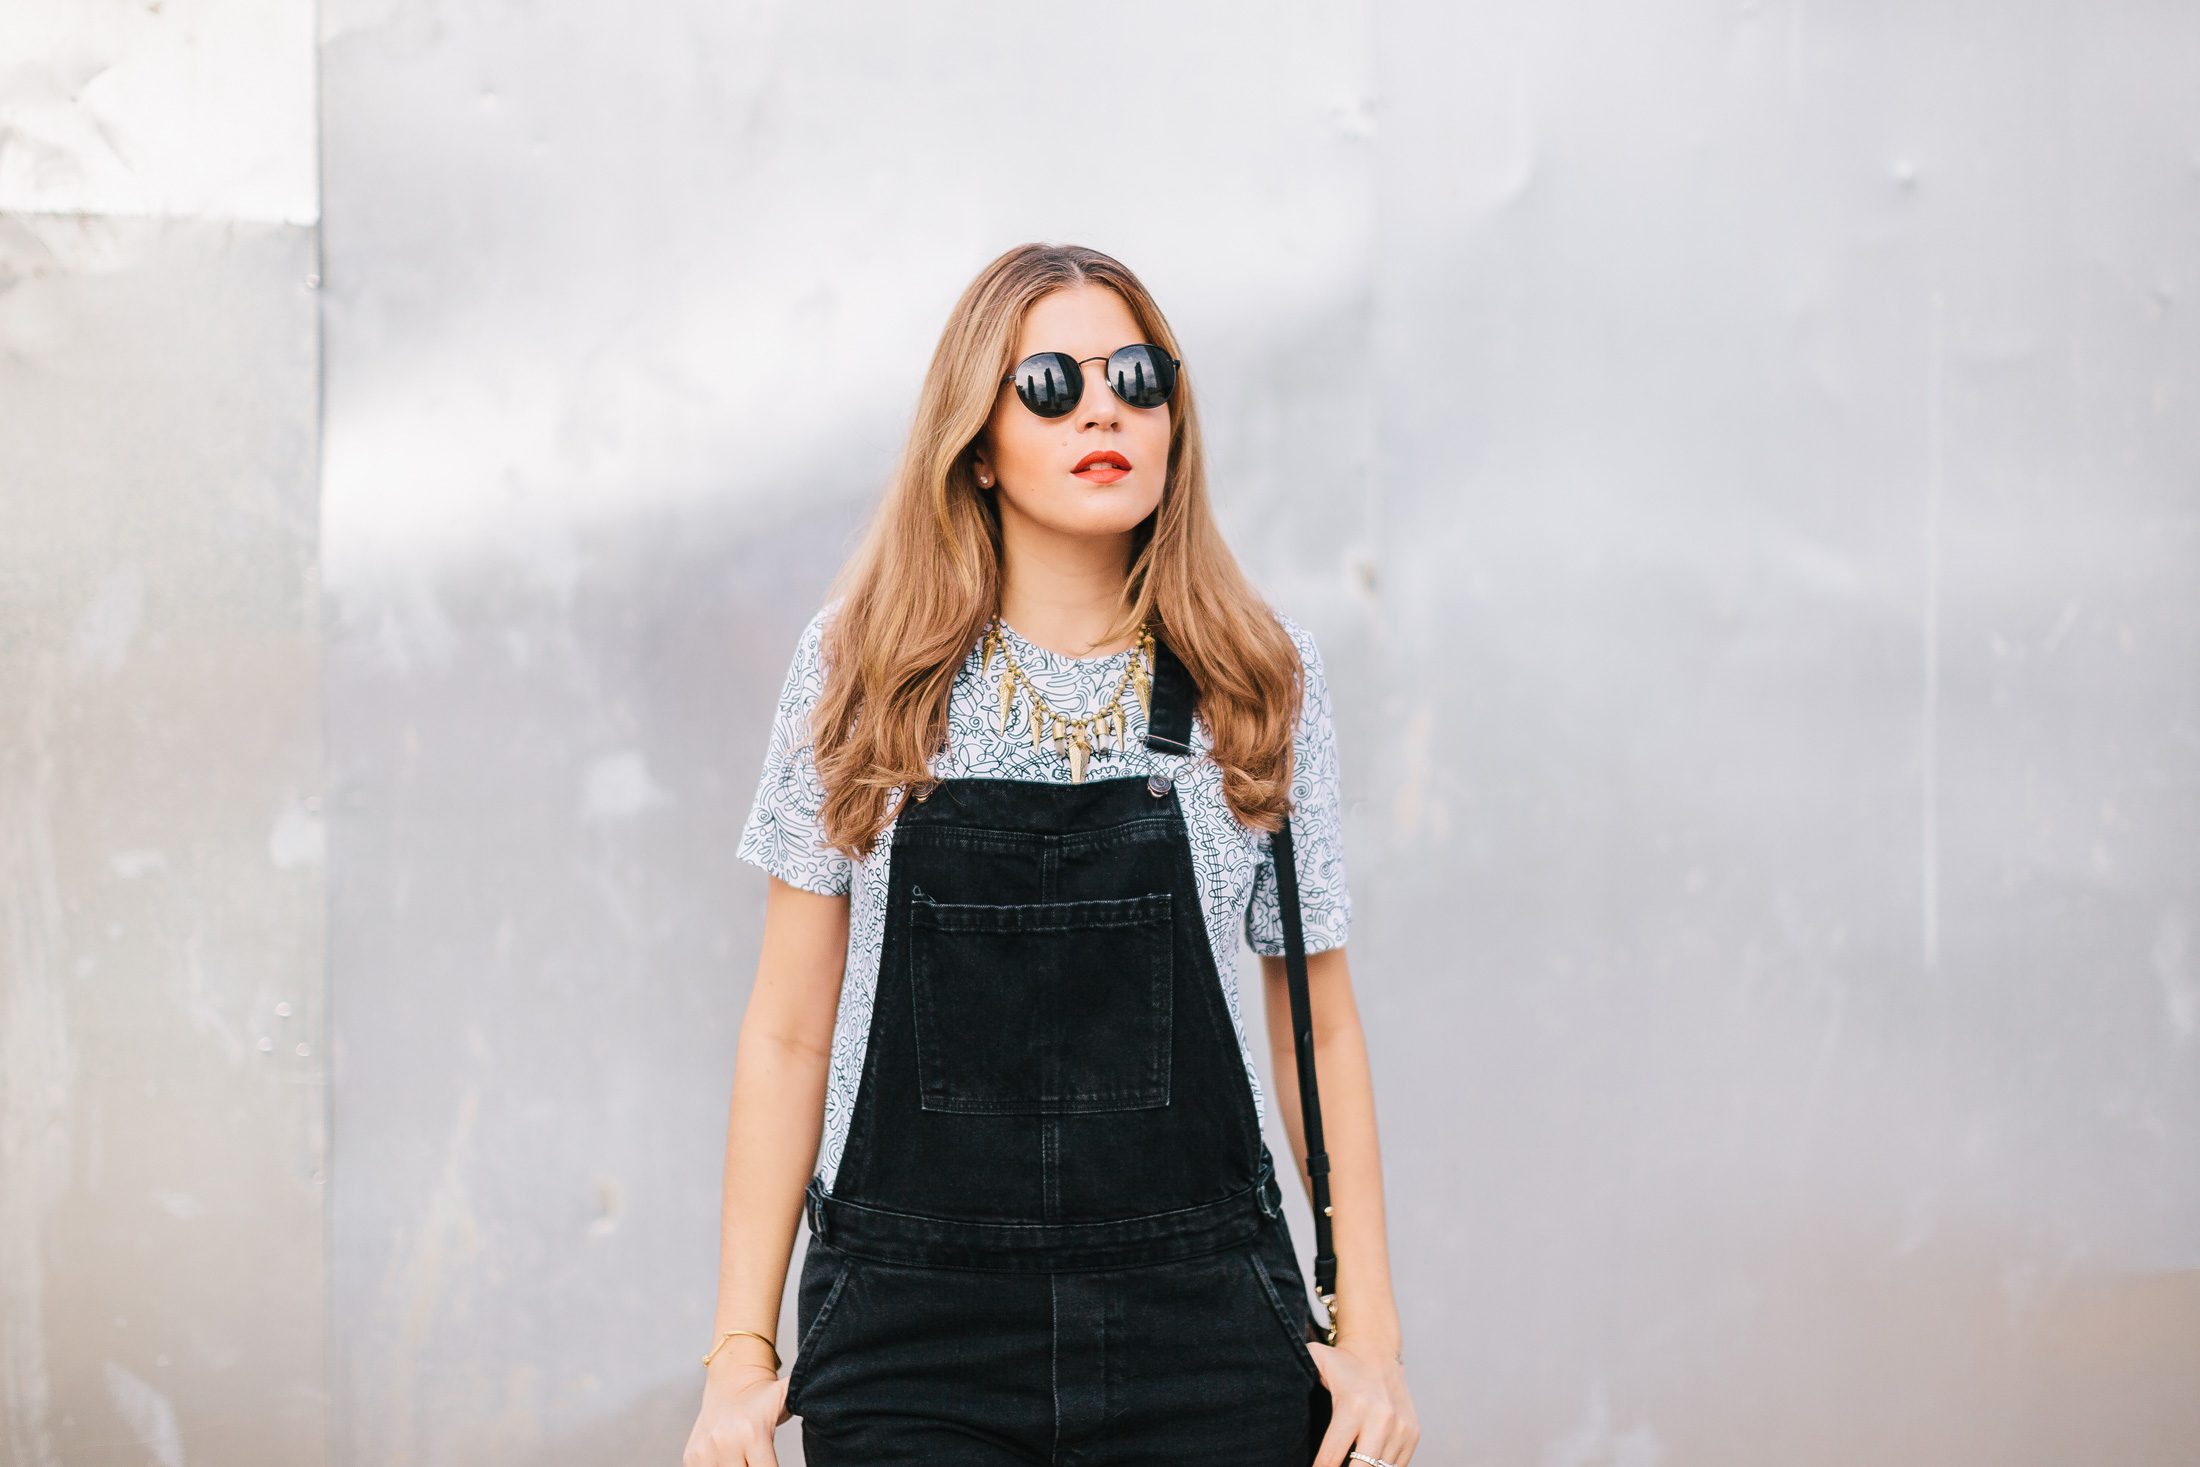 Overalls and t-shirt look